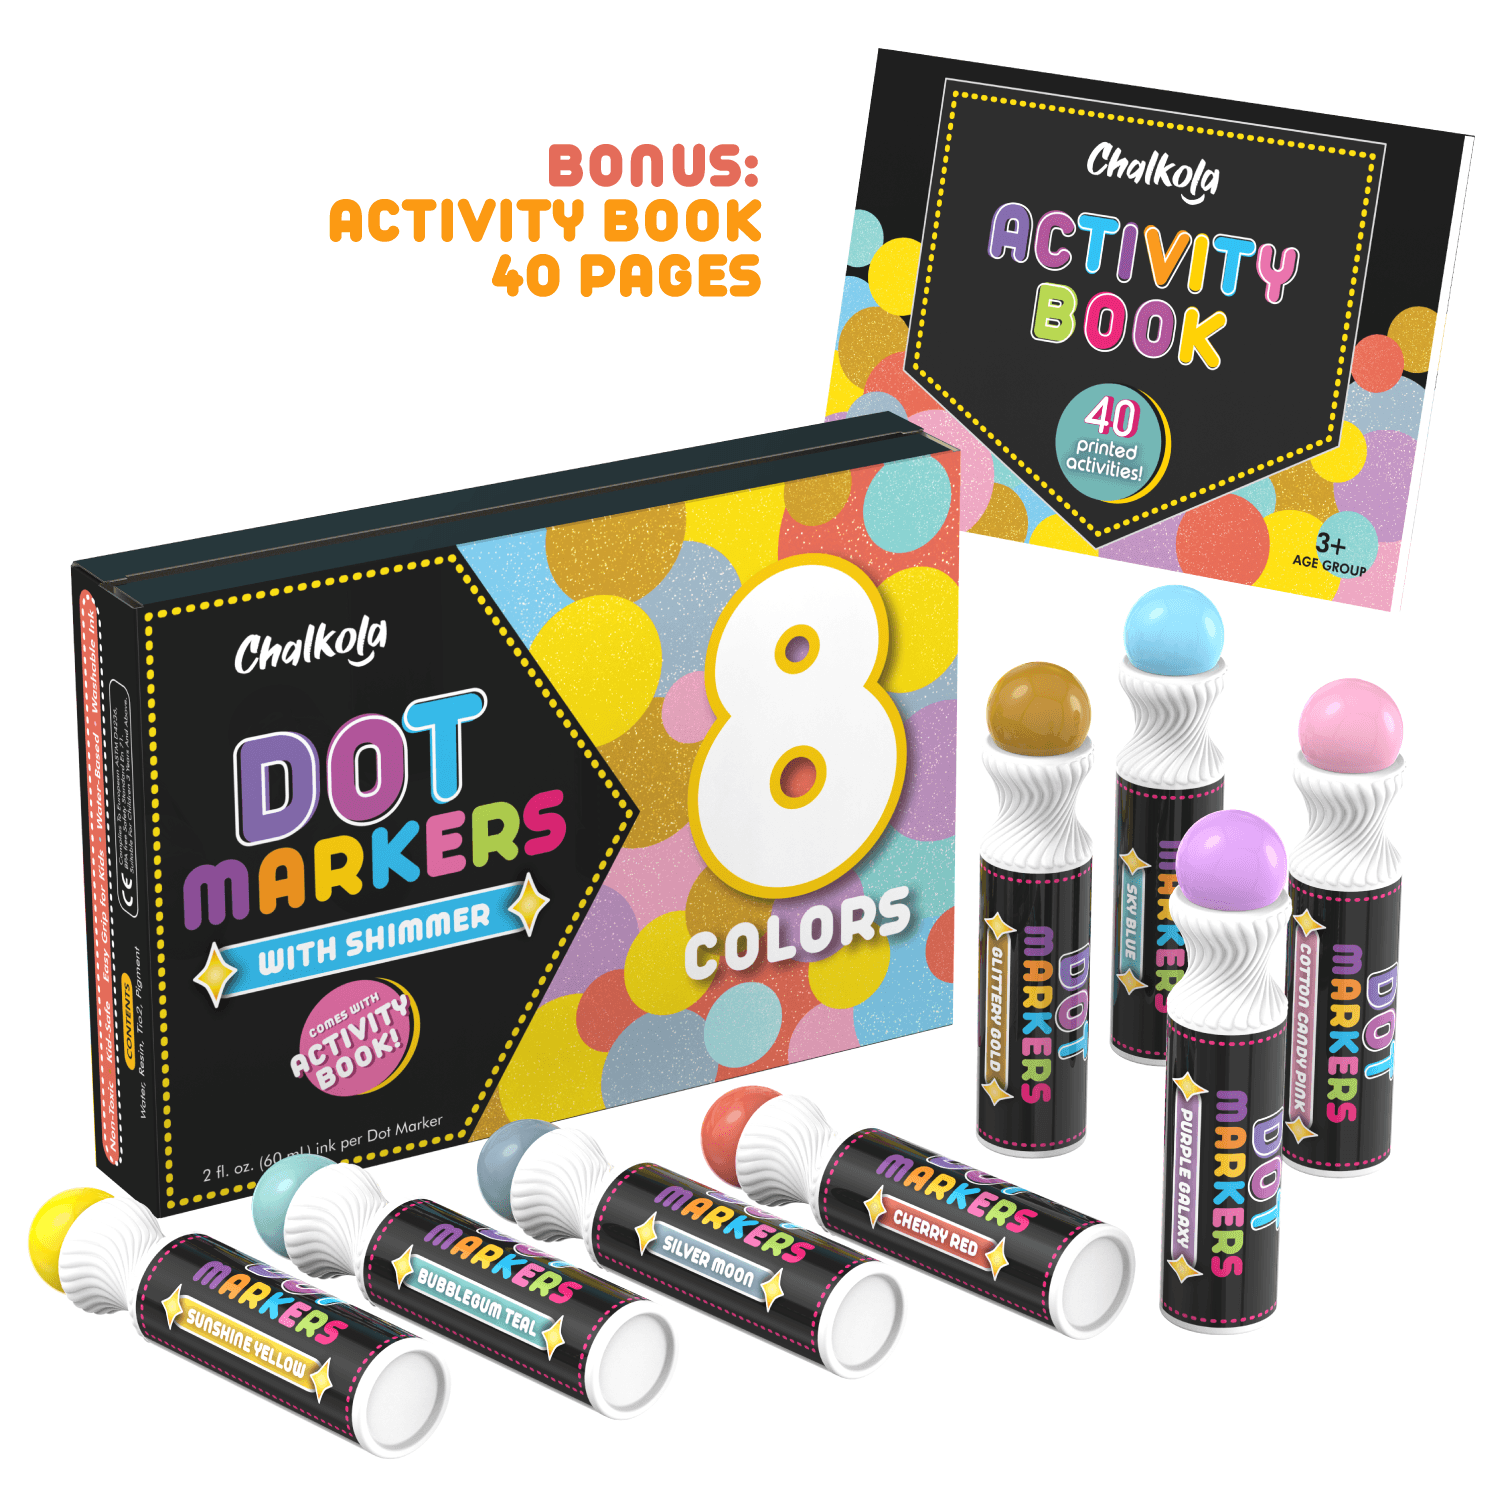 Do-A-Dot Art Shimmers Markers, Washable - 5 pack